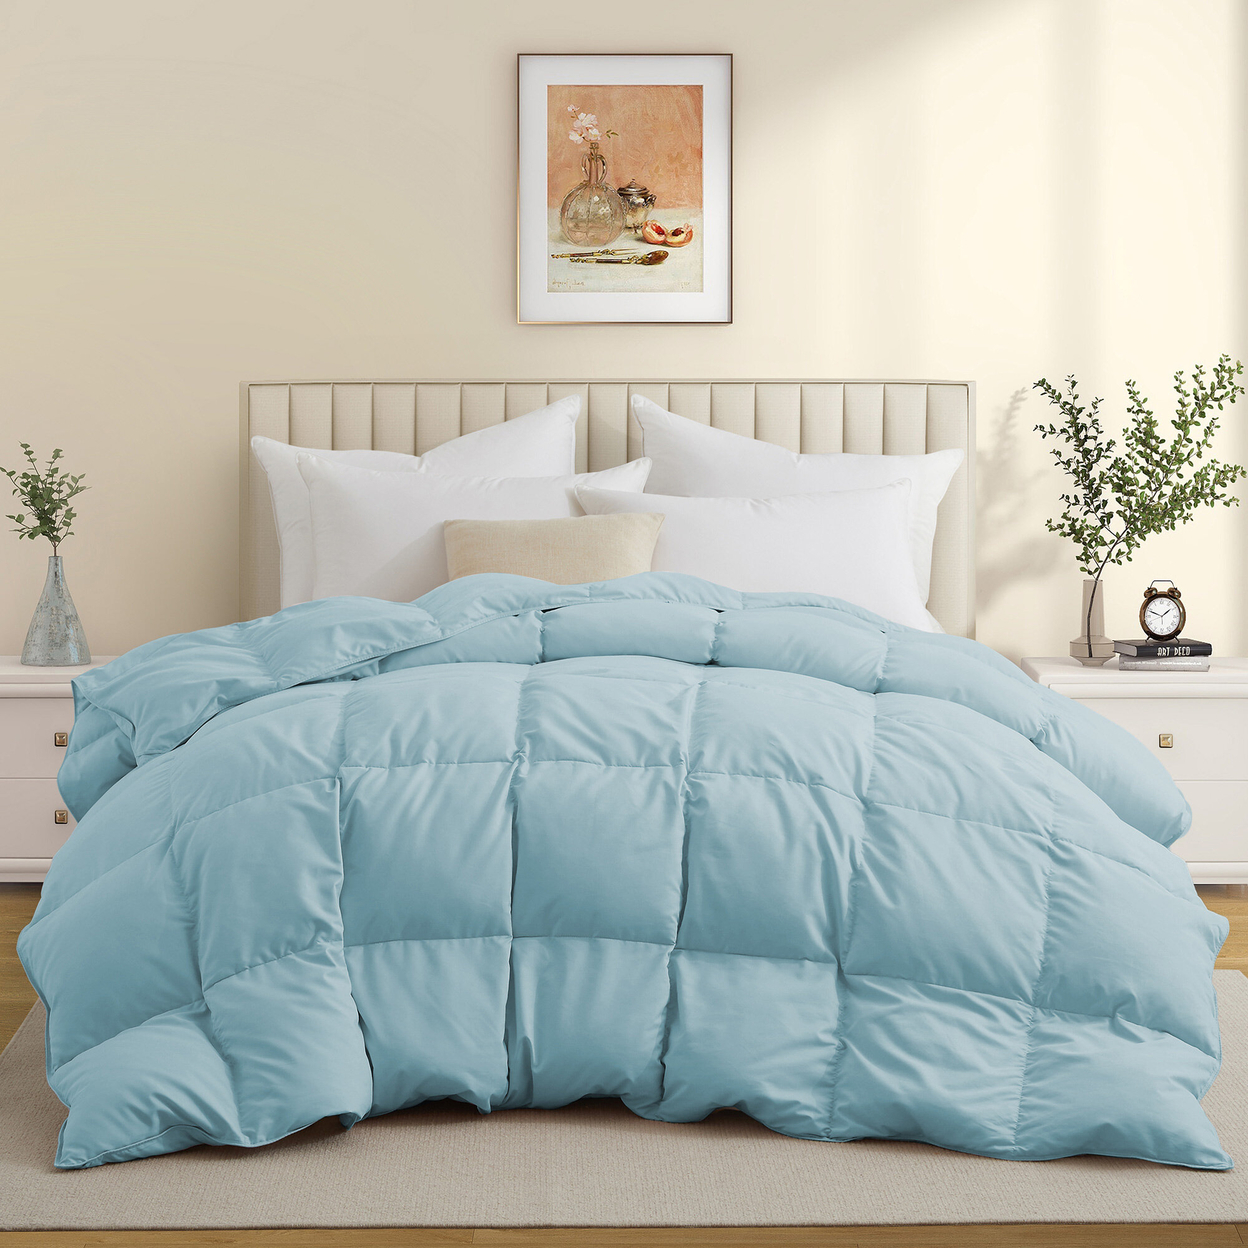 Premium All Seasons White Goose Feather Fiber And Down Comforter - Winter Sky, Twin